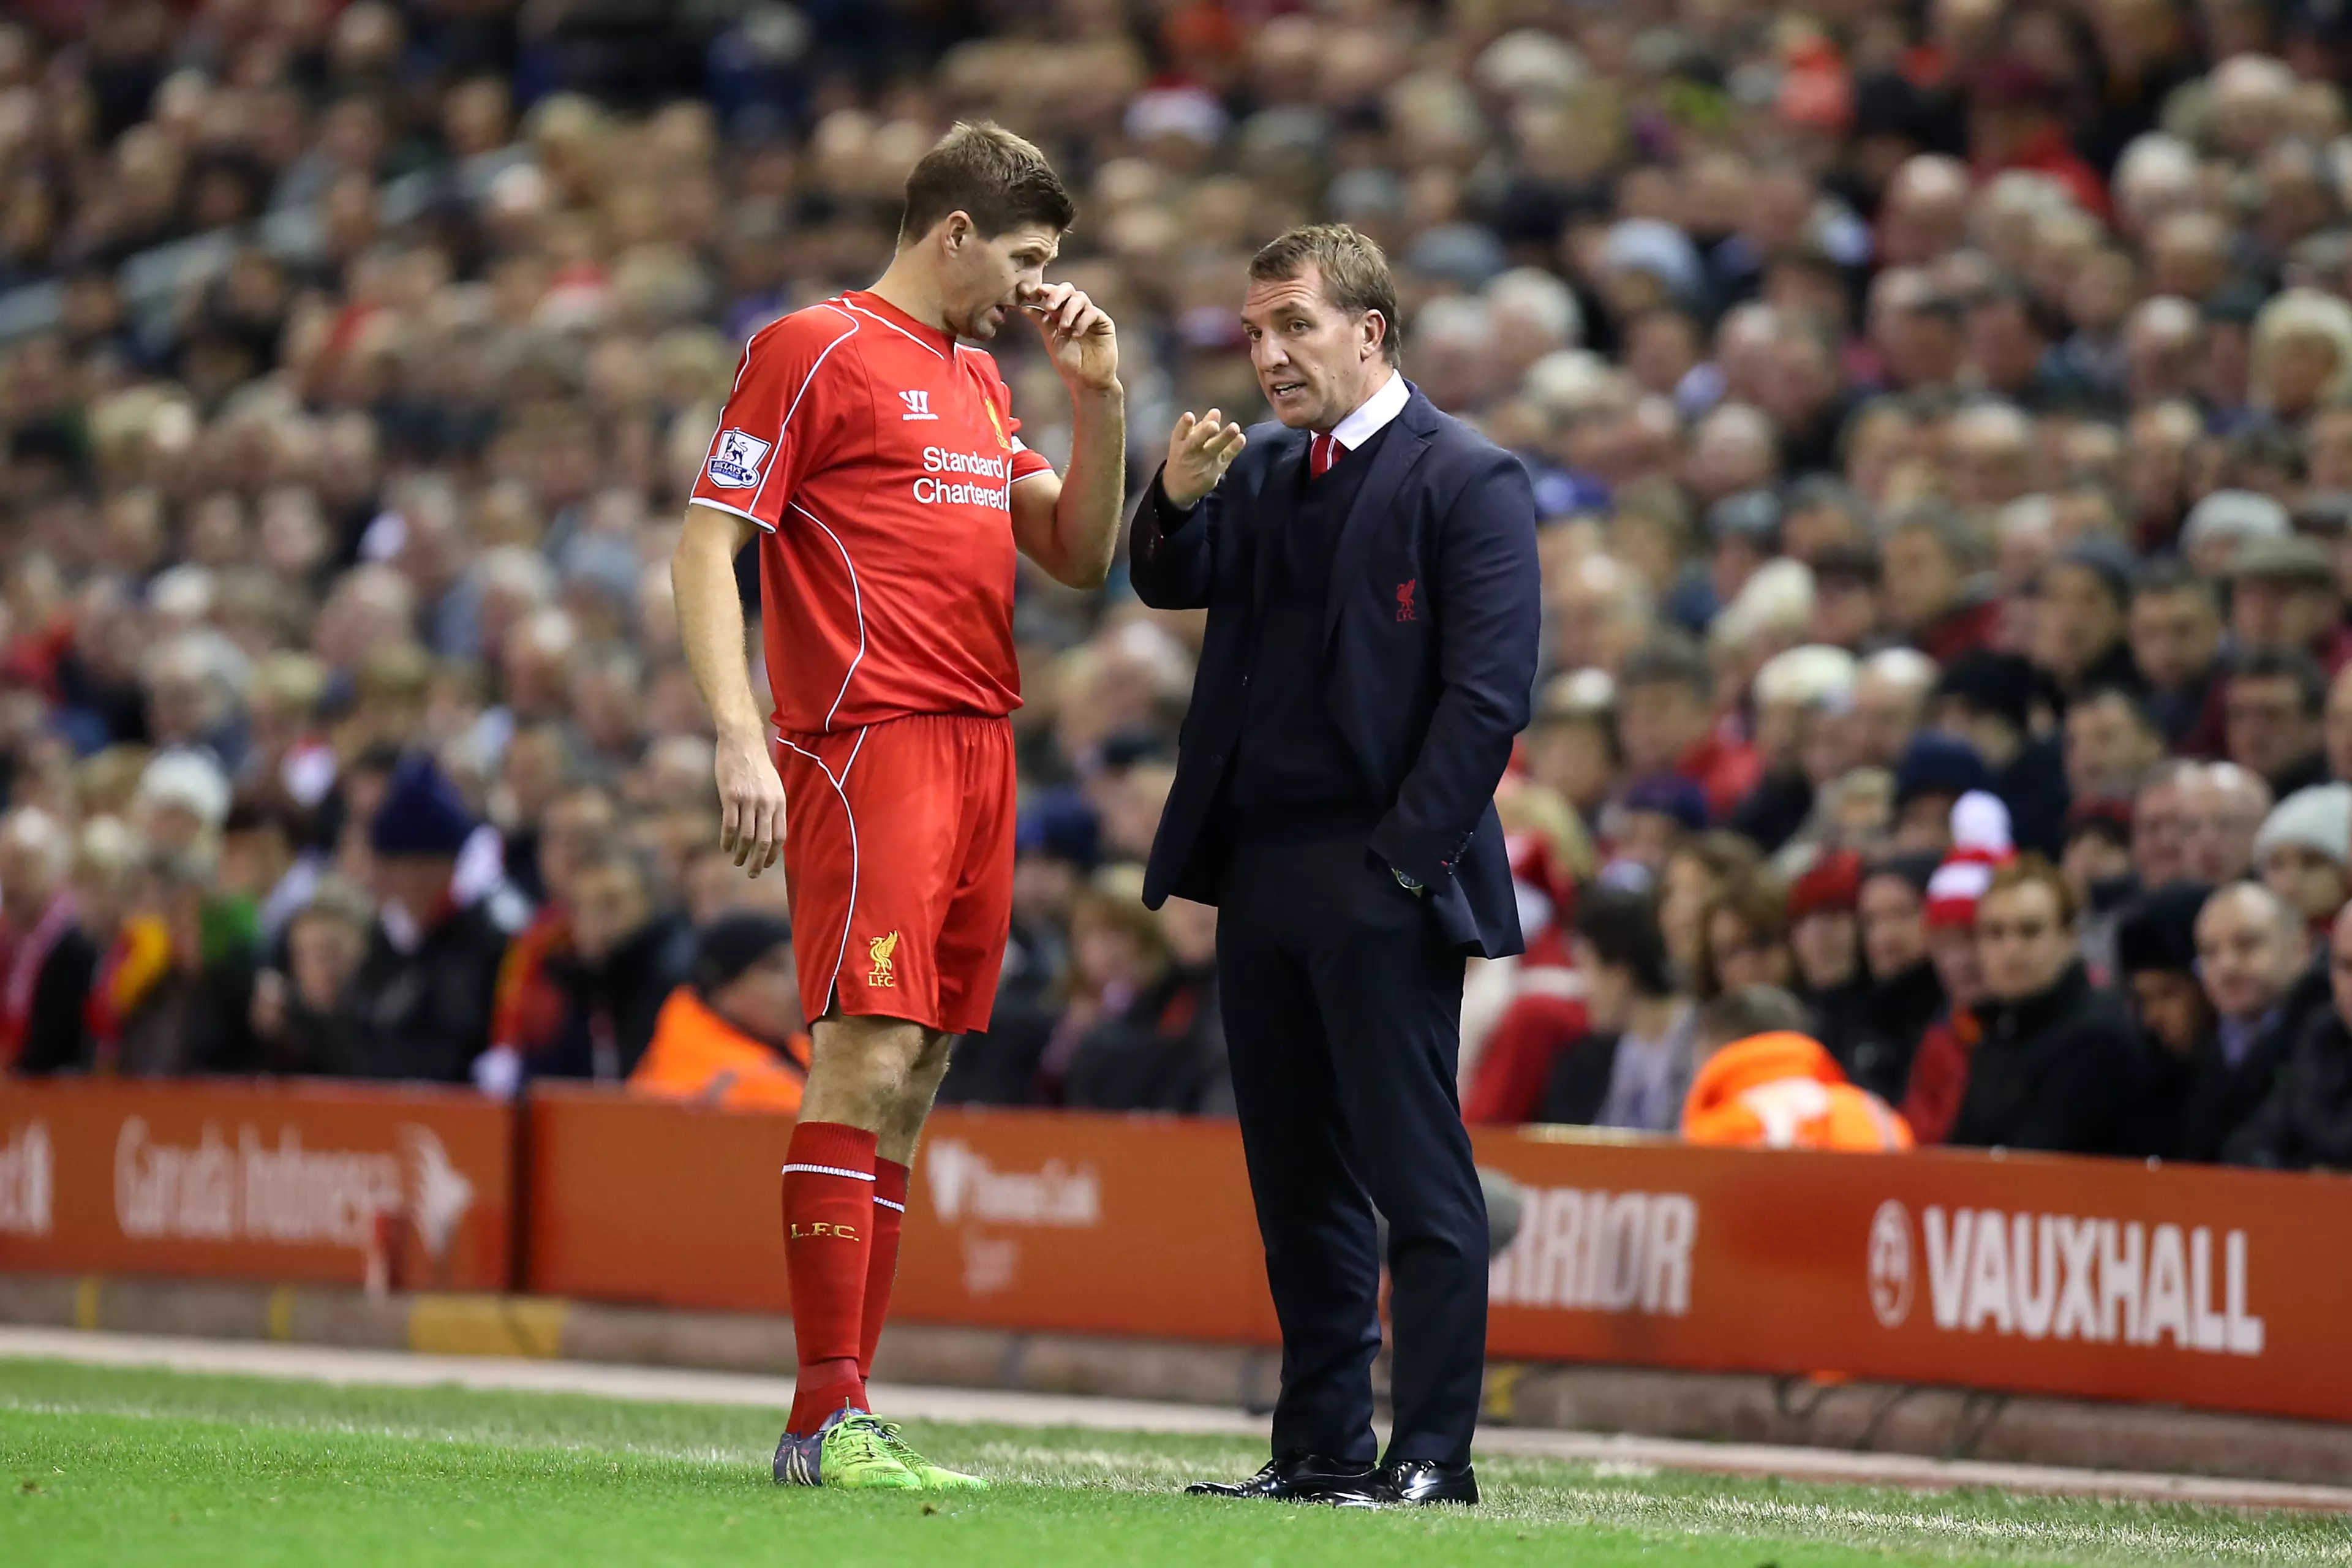 Rodgers gives instructions to Gerrard. Image: PA